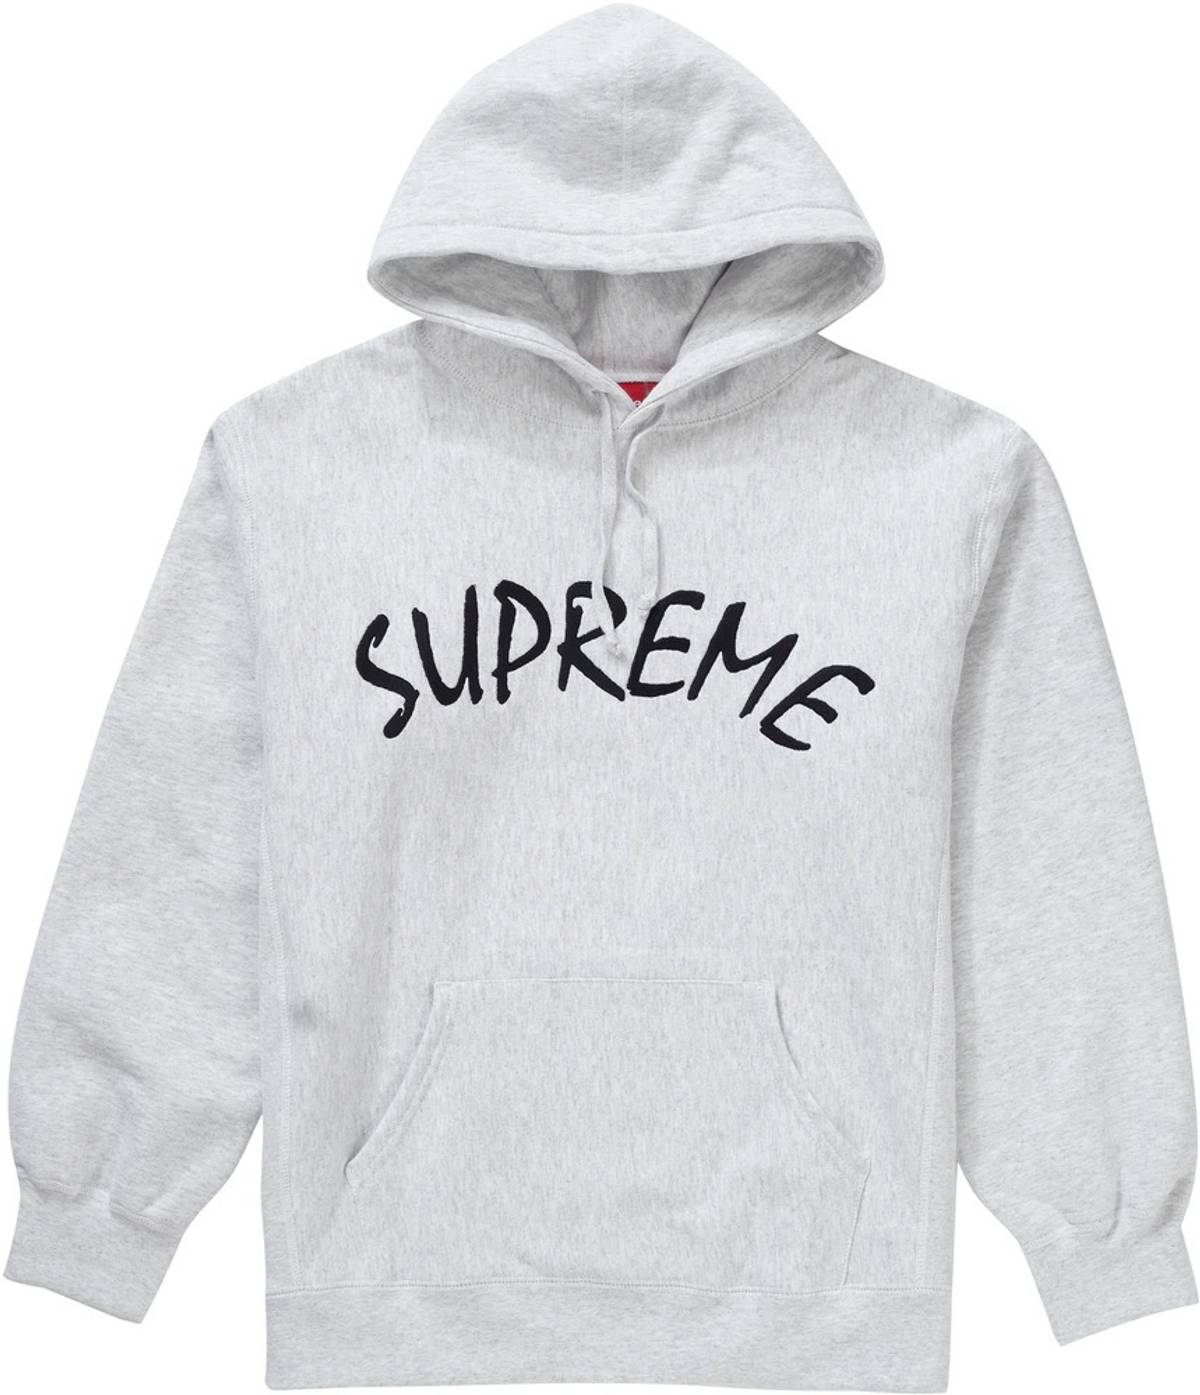 SUPREME CLOTHING SUPREME FTP ARC HOODIE ASH GREY SS21SW58-GRY